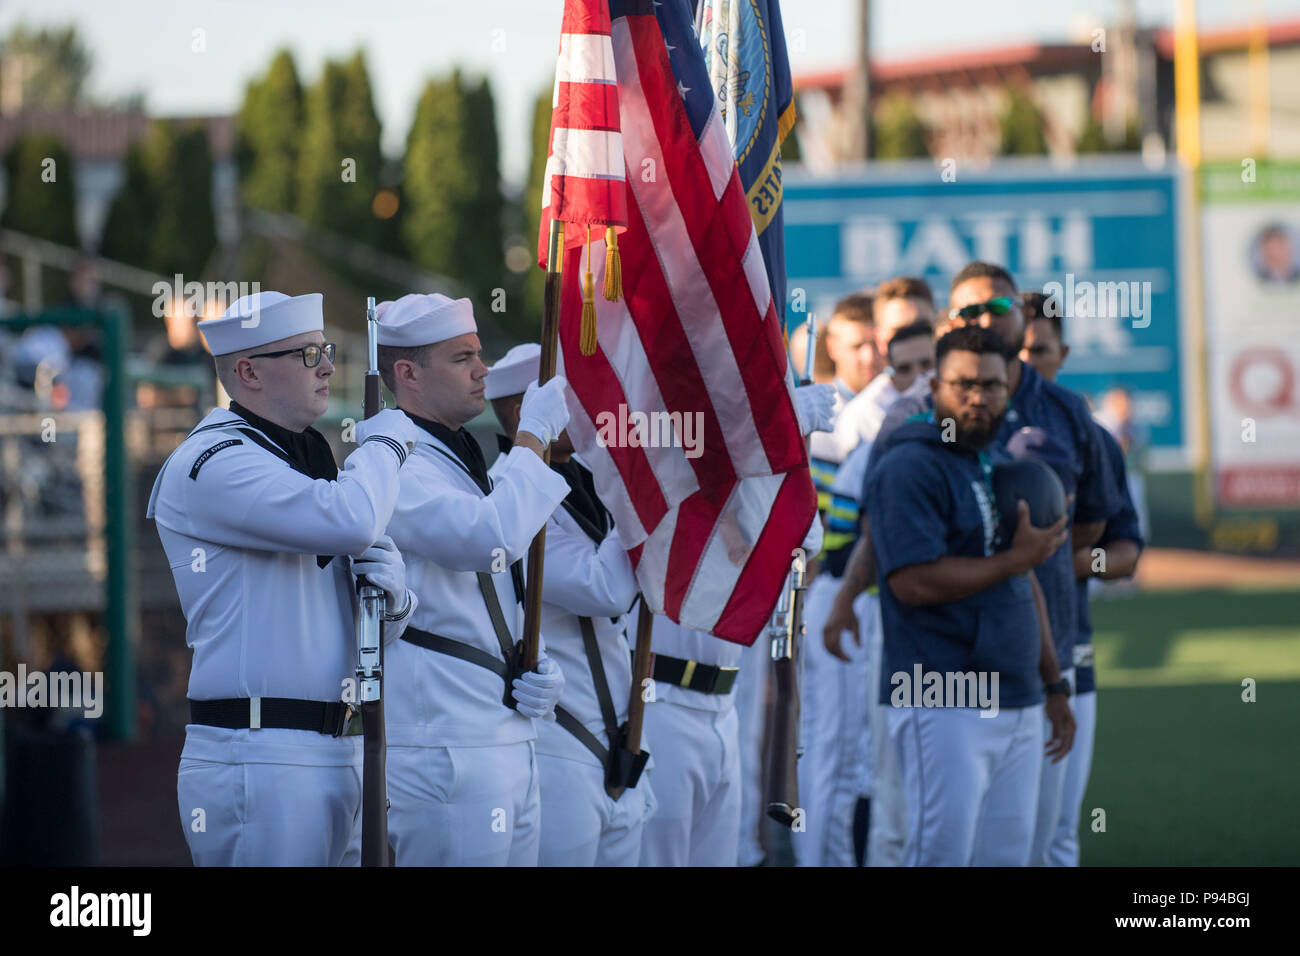 180712-N-DA737-0044 Everett, Wash. (July 12, 2018) Naval Station Everett's honor guard present the colors during the National Anthem at an Everett Aquasox game during Military Appreciation Night. The Aquasox are a Minor League Baseball team of the Northwest league and an affiliate of the Seattle Mariners. NSE's mission is to provide a secure platform for Navy and Coast Guard forces, important mission capabilities, and quality of life for service members and their families. (U.S. Navy photo by Mass Communication Specialist 2nd Class Jonathan Jiang/Released) Stock Photo